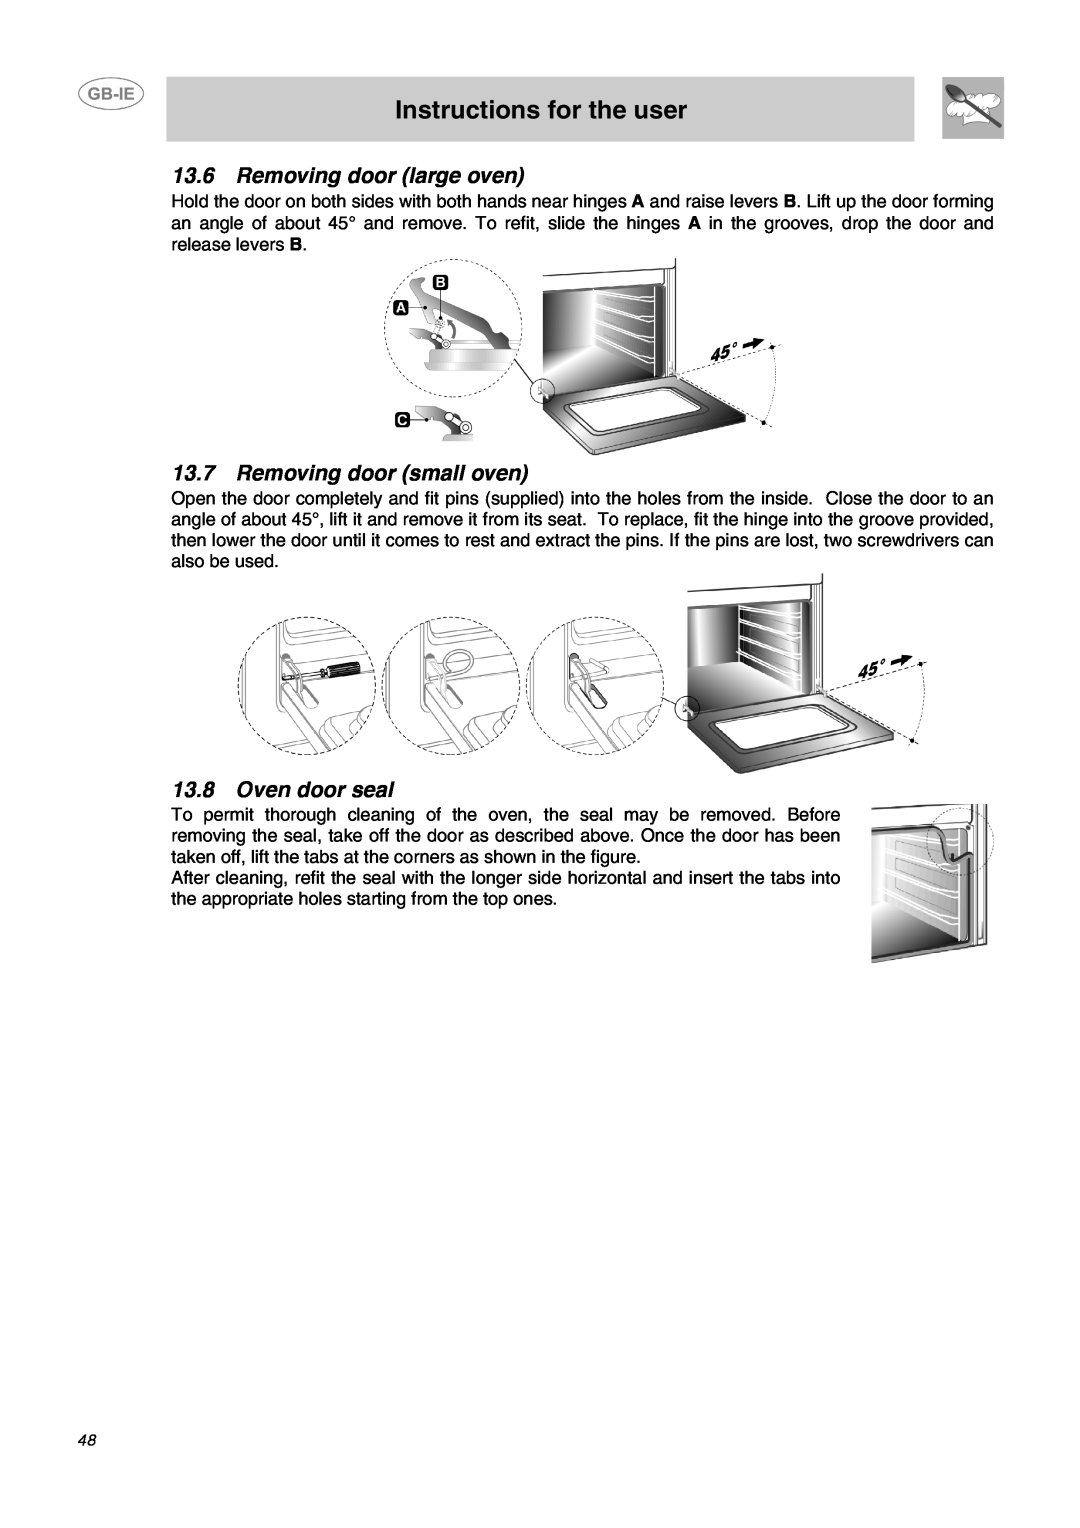 Smeg DO10PSS-5 manual Removing door large oven, Removing door small oven, Oven door seal, Instructions for the user 